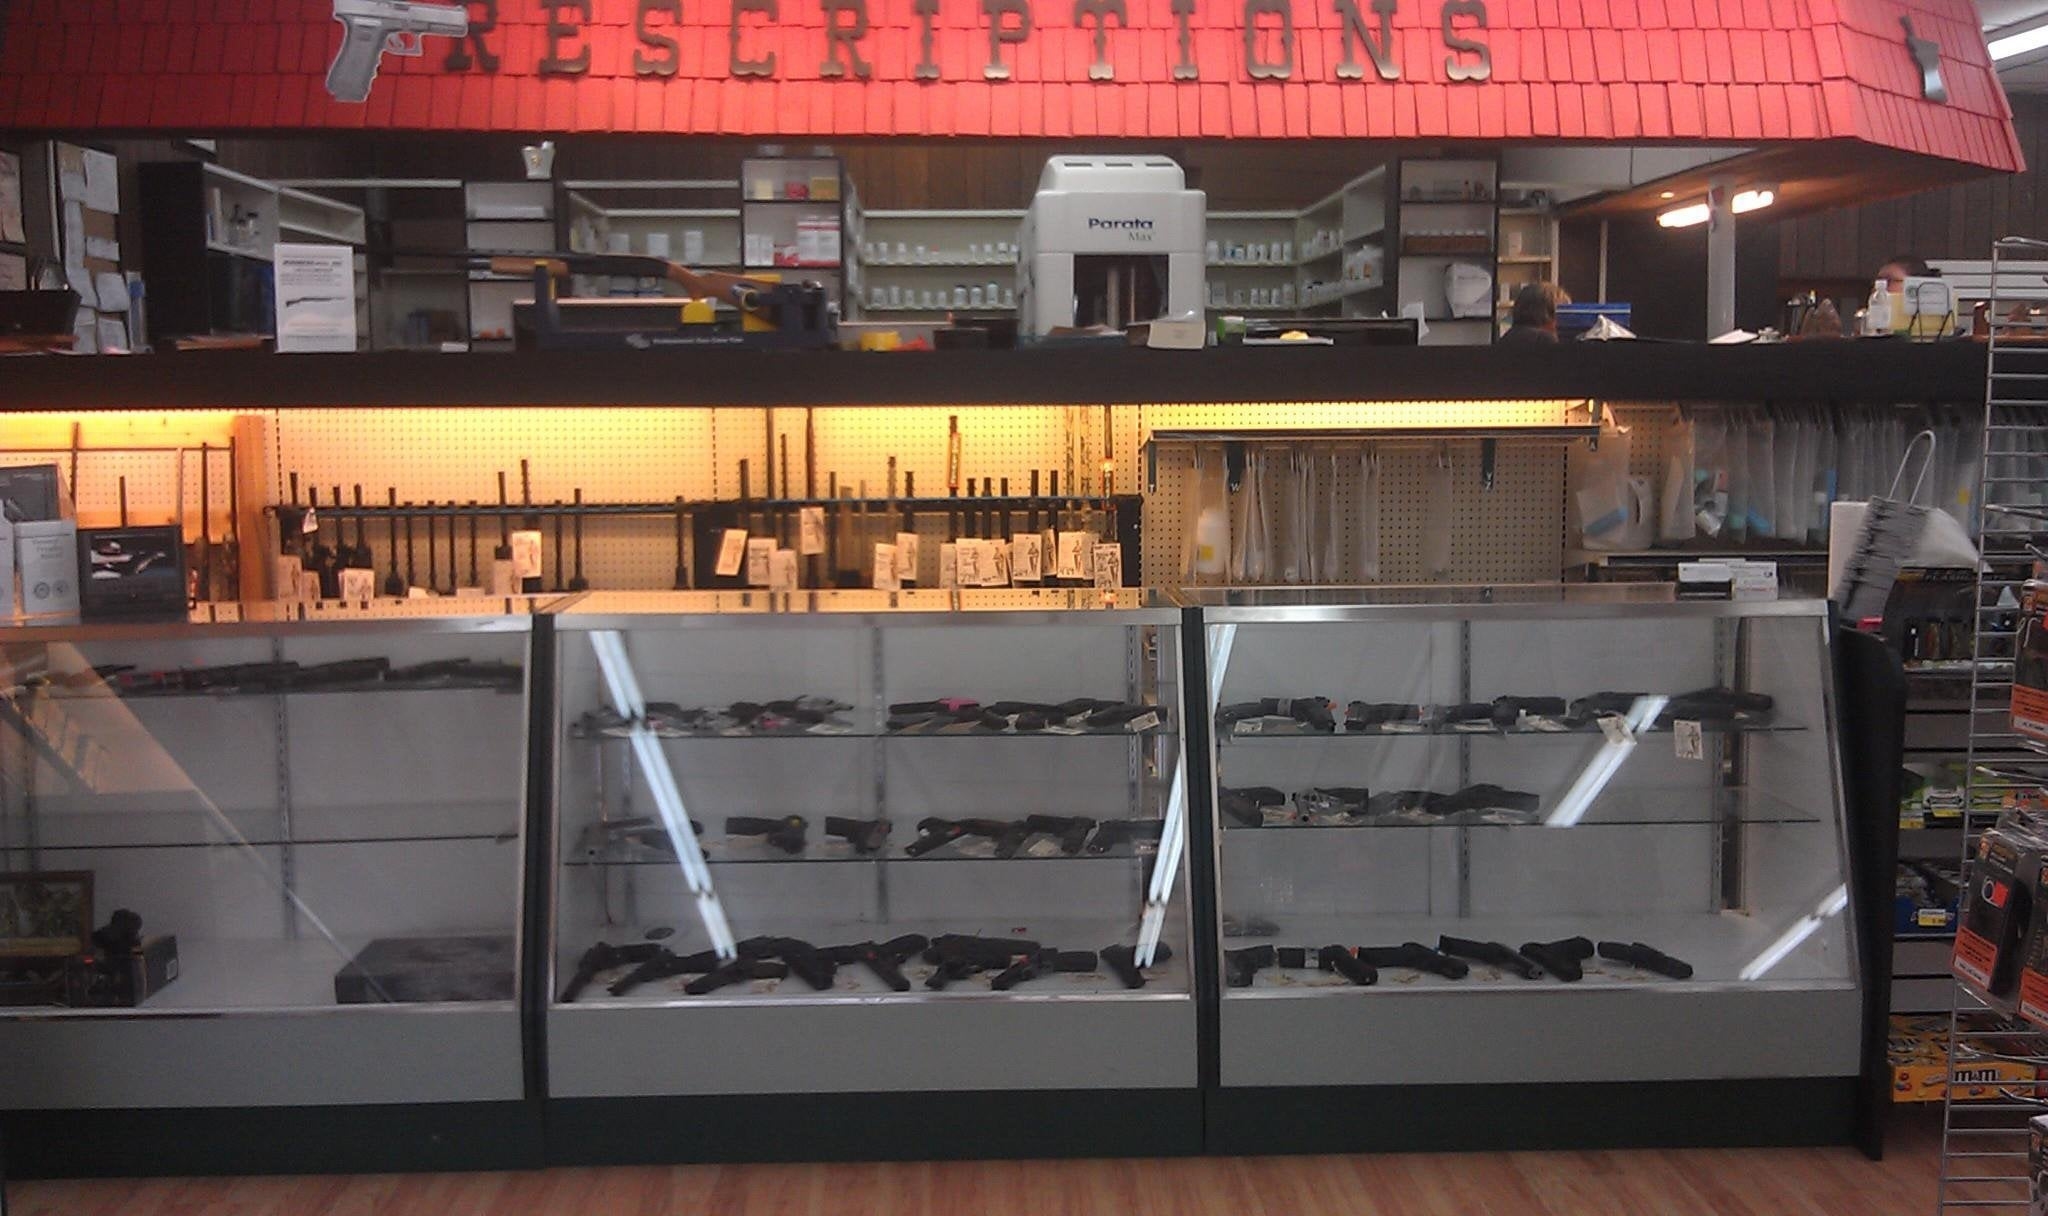 Gun counter with firearms displayed under glass, adjacent to a prescriptions sign in a store